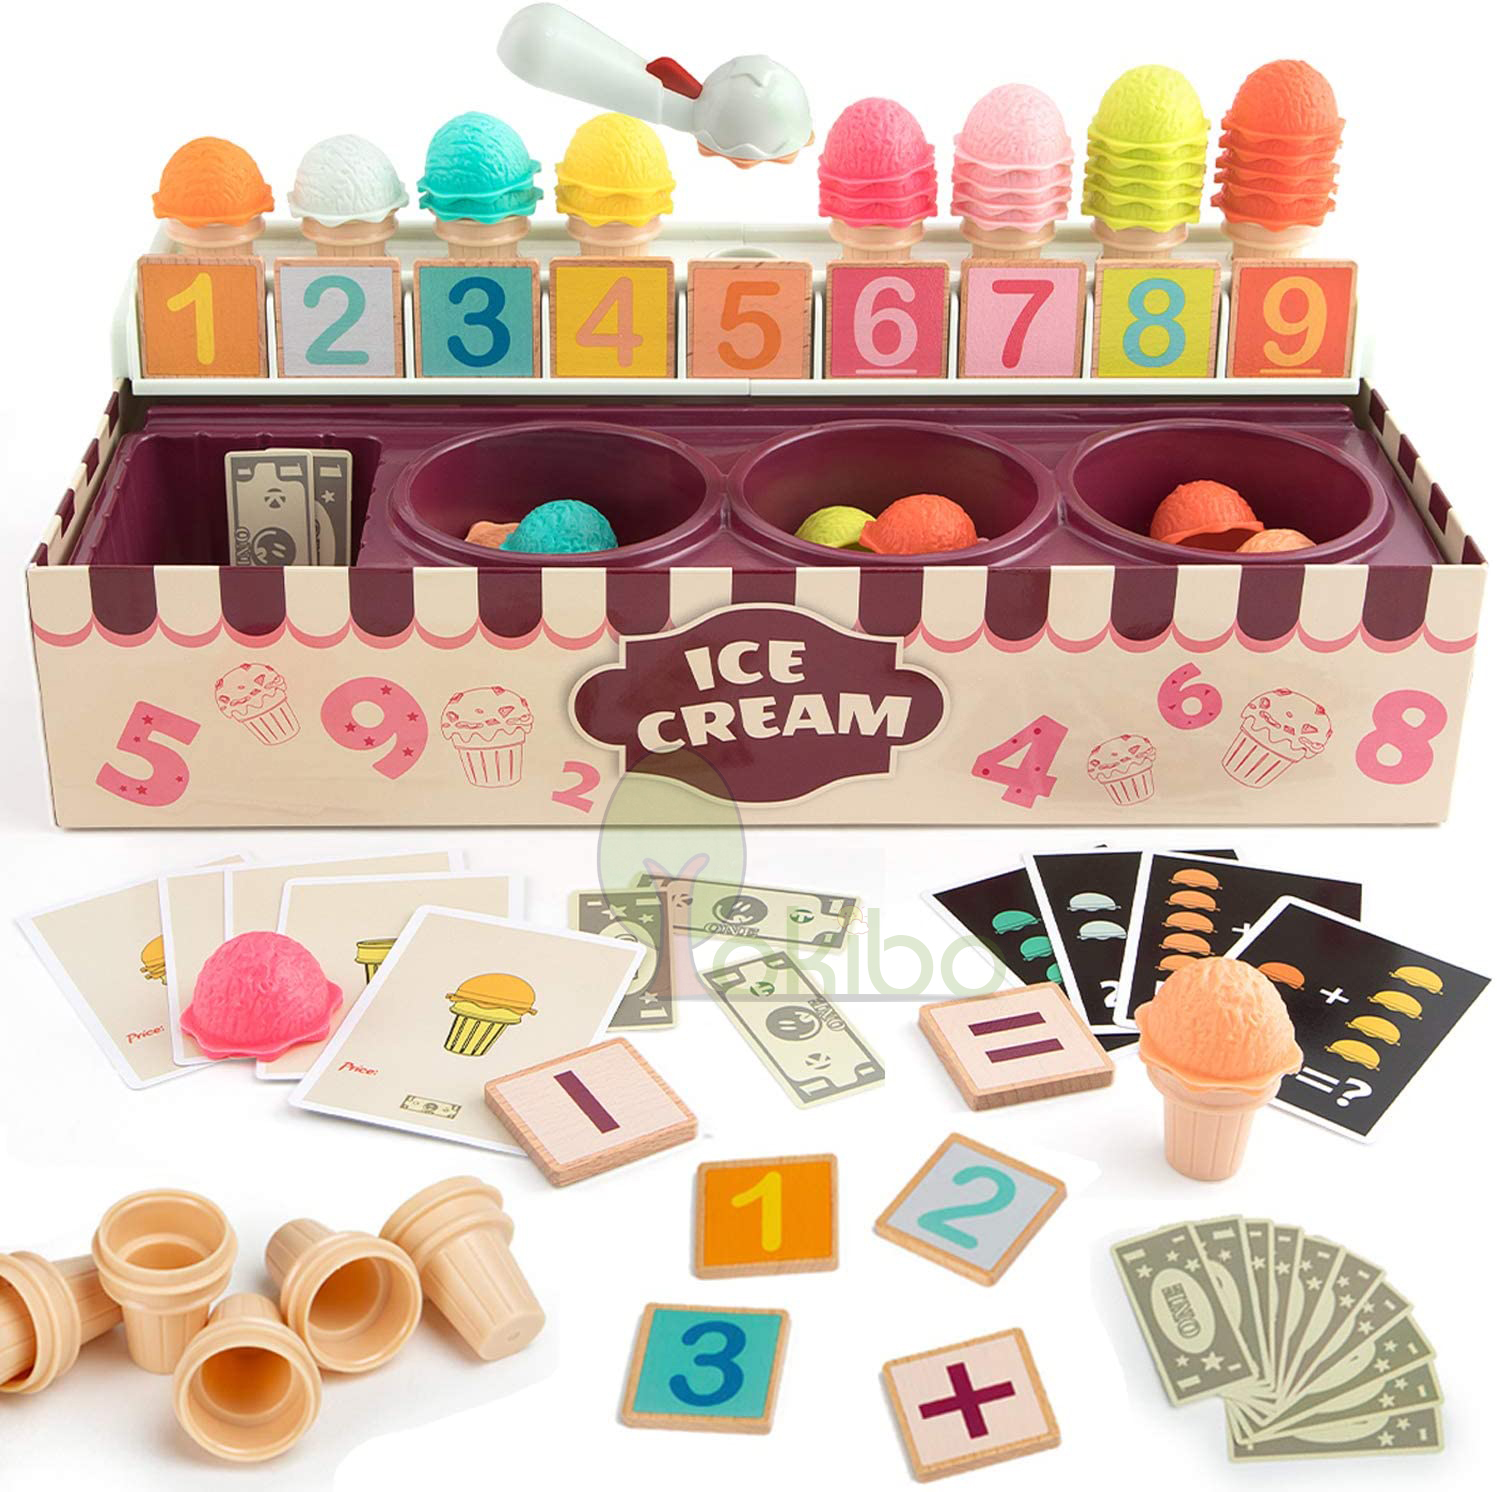 ROCONAT 16/19Pcs/set Ice Cream Trolley Toy Set for Kids Toddlers with Music and Light Kitchen Playsets Color Random